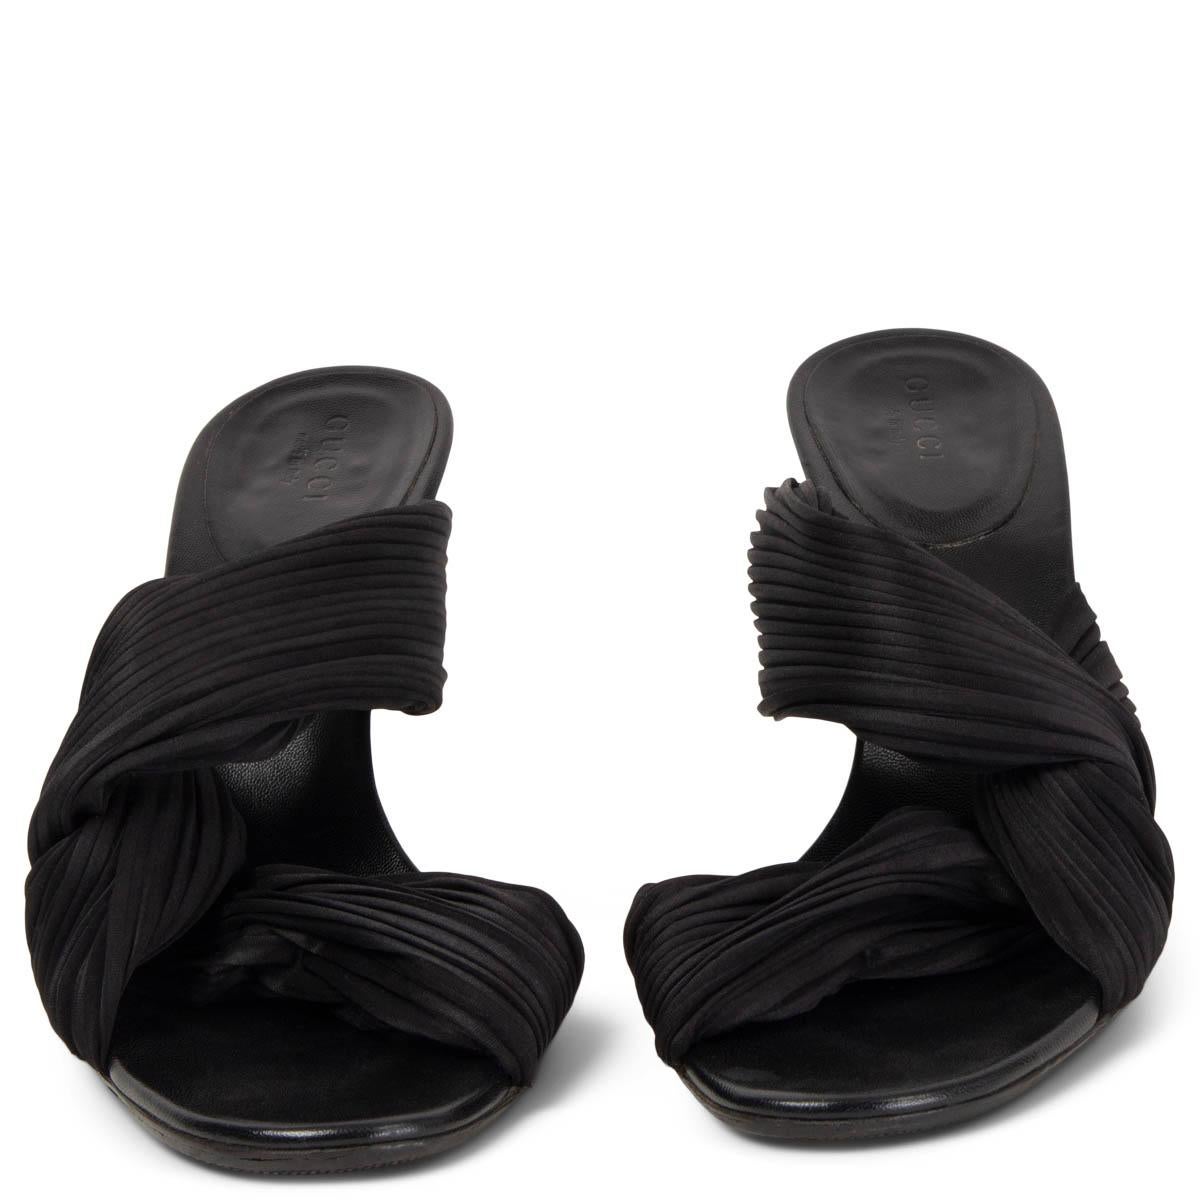 100% authentic Gucci by Tom Ford pleated satin strap sandals in black fabric and leather. Have been worn and show some minimal signs of wear. Overall in excellent condition. Rubber soles got added.

Measurements
Imprinted Size	38.5
Shoe